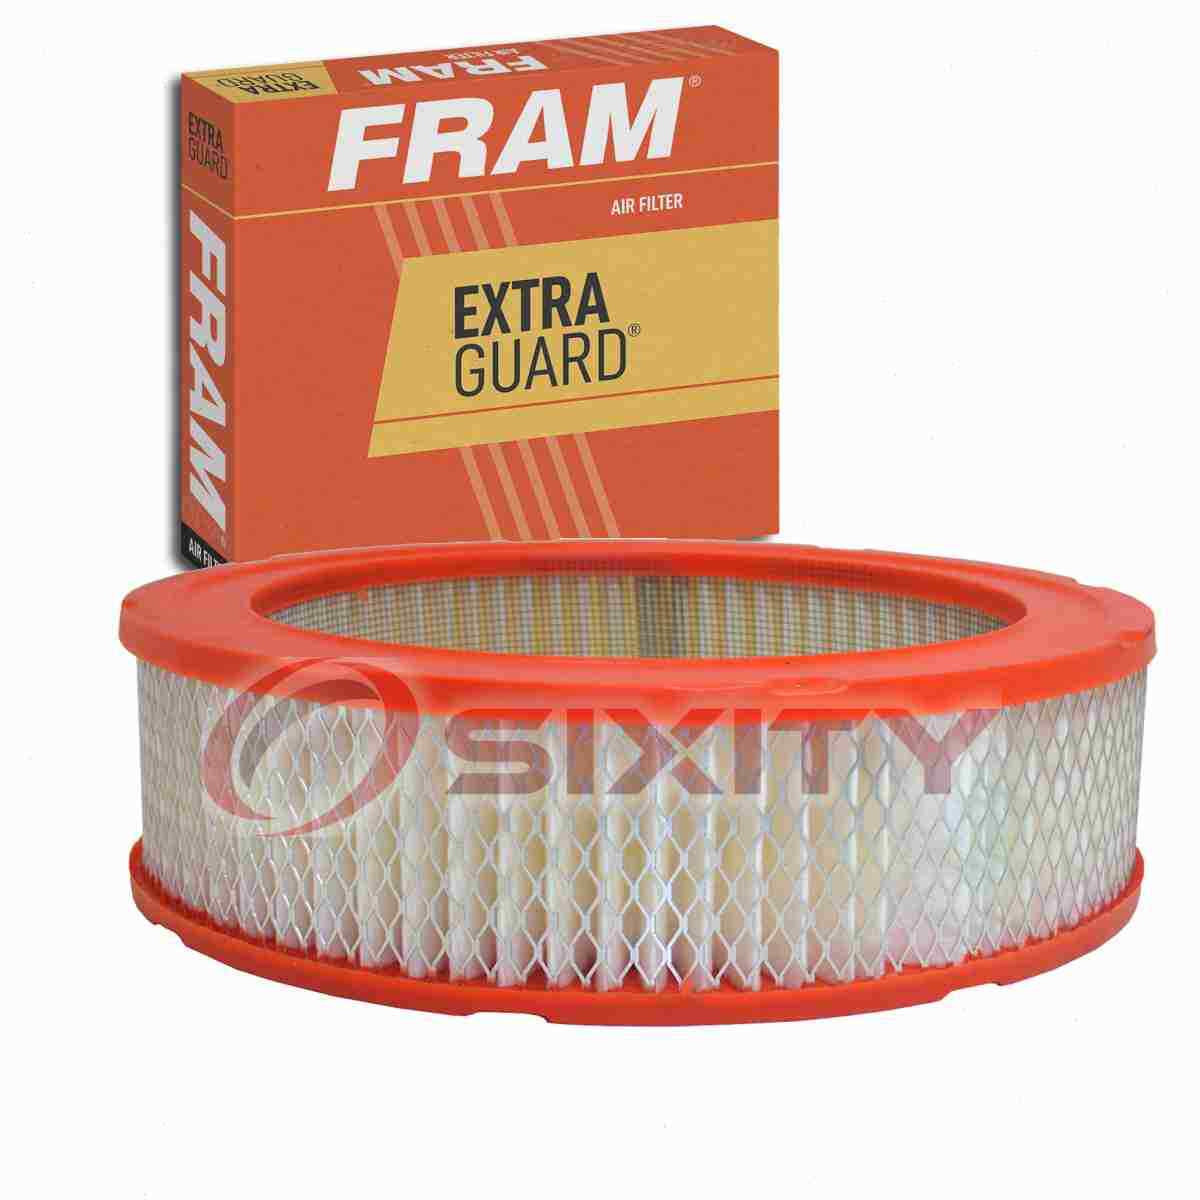 FRAM Extra Guard Air Filter for 1964-1976 Plymouth Valiant Intake Inlet nj